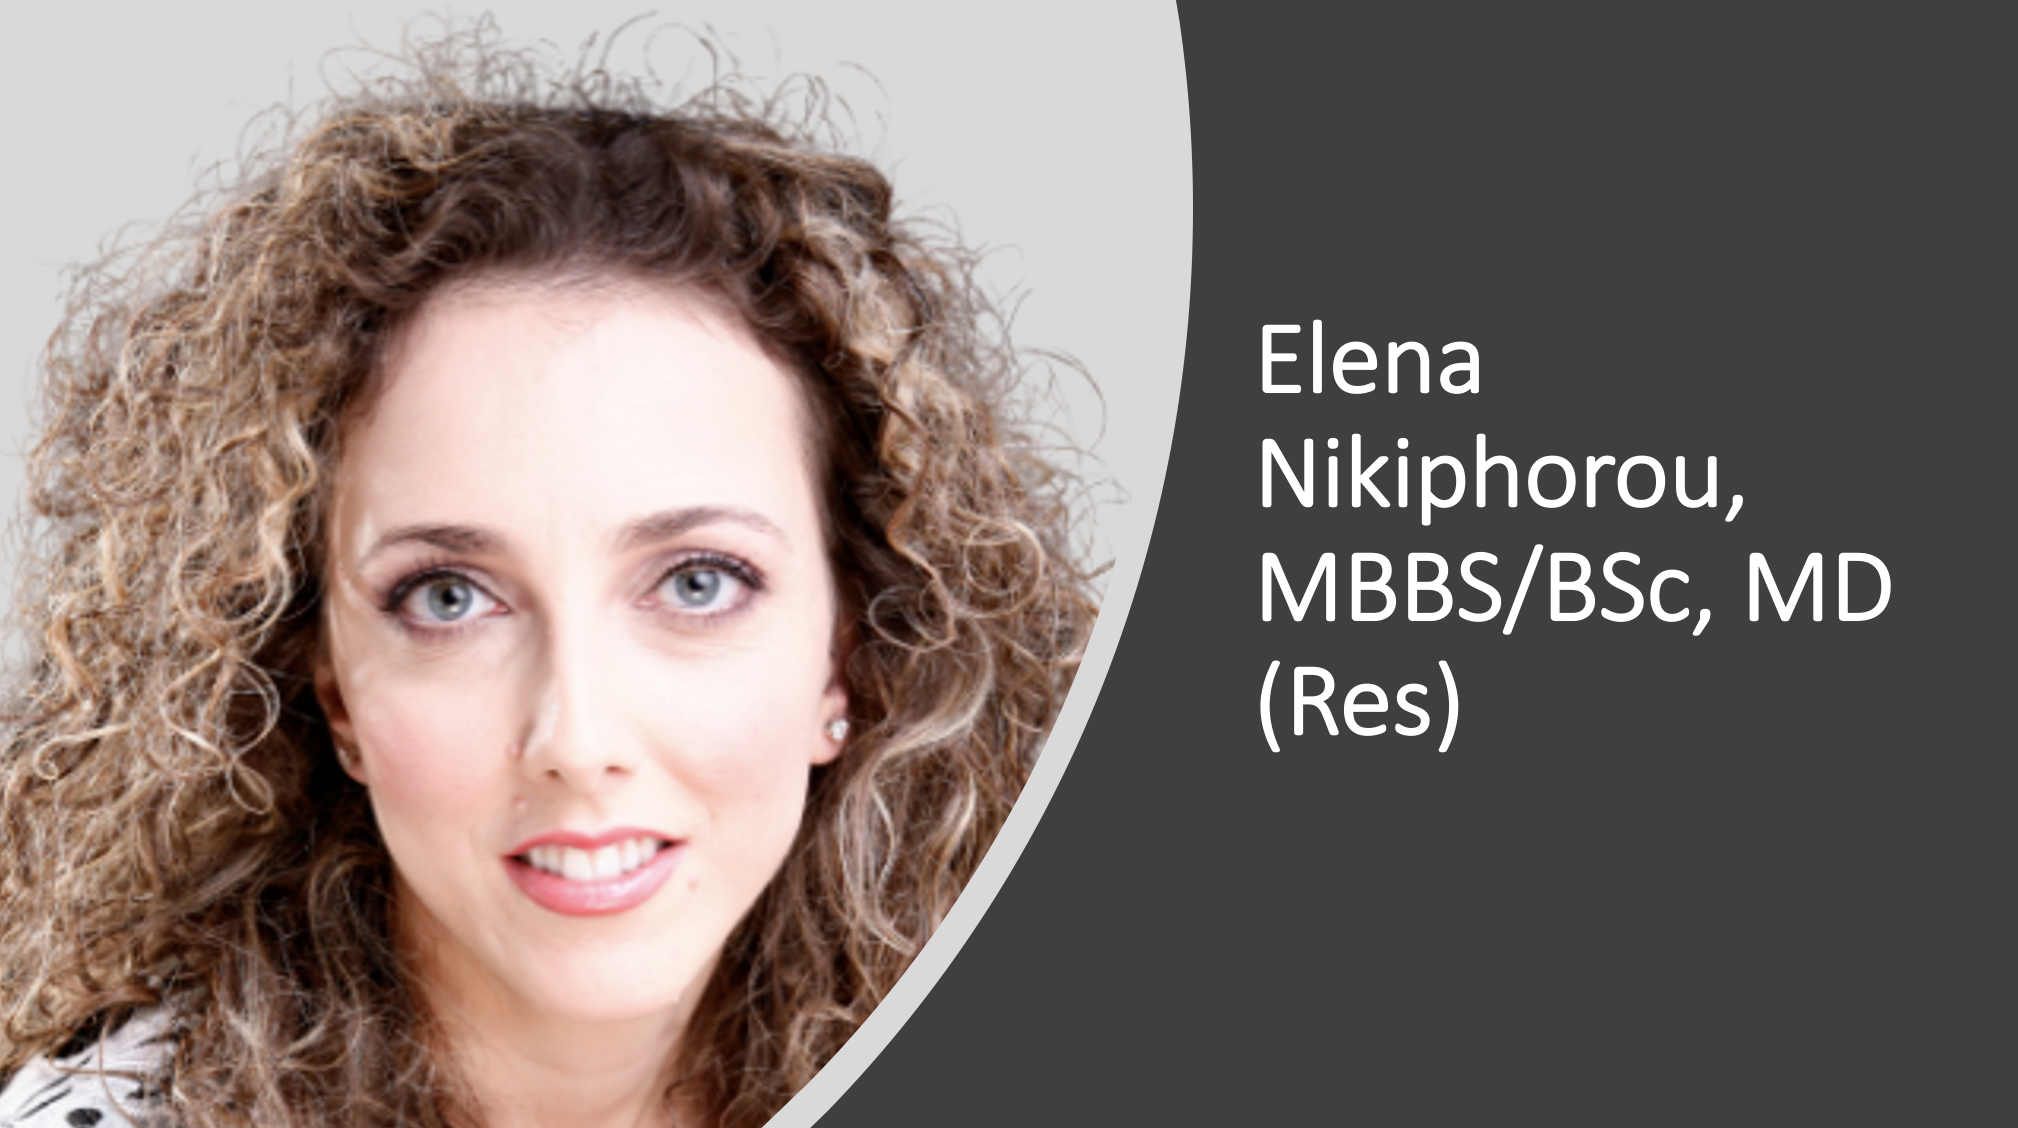 Elena Nikiphorou, MBBS/BSc, MD (Res): Self-Management Strategies for Patients With Arthritis